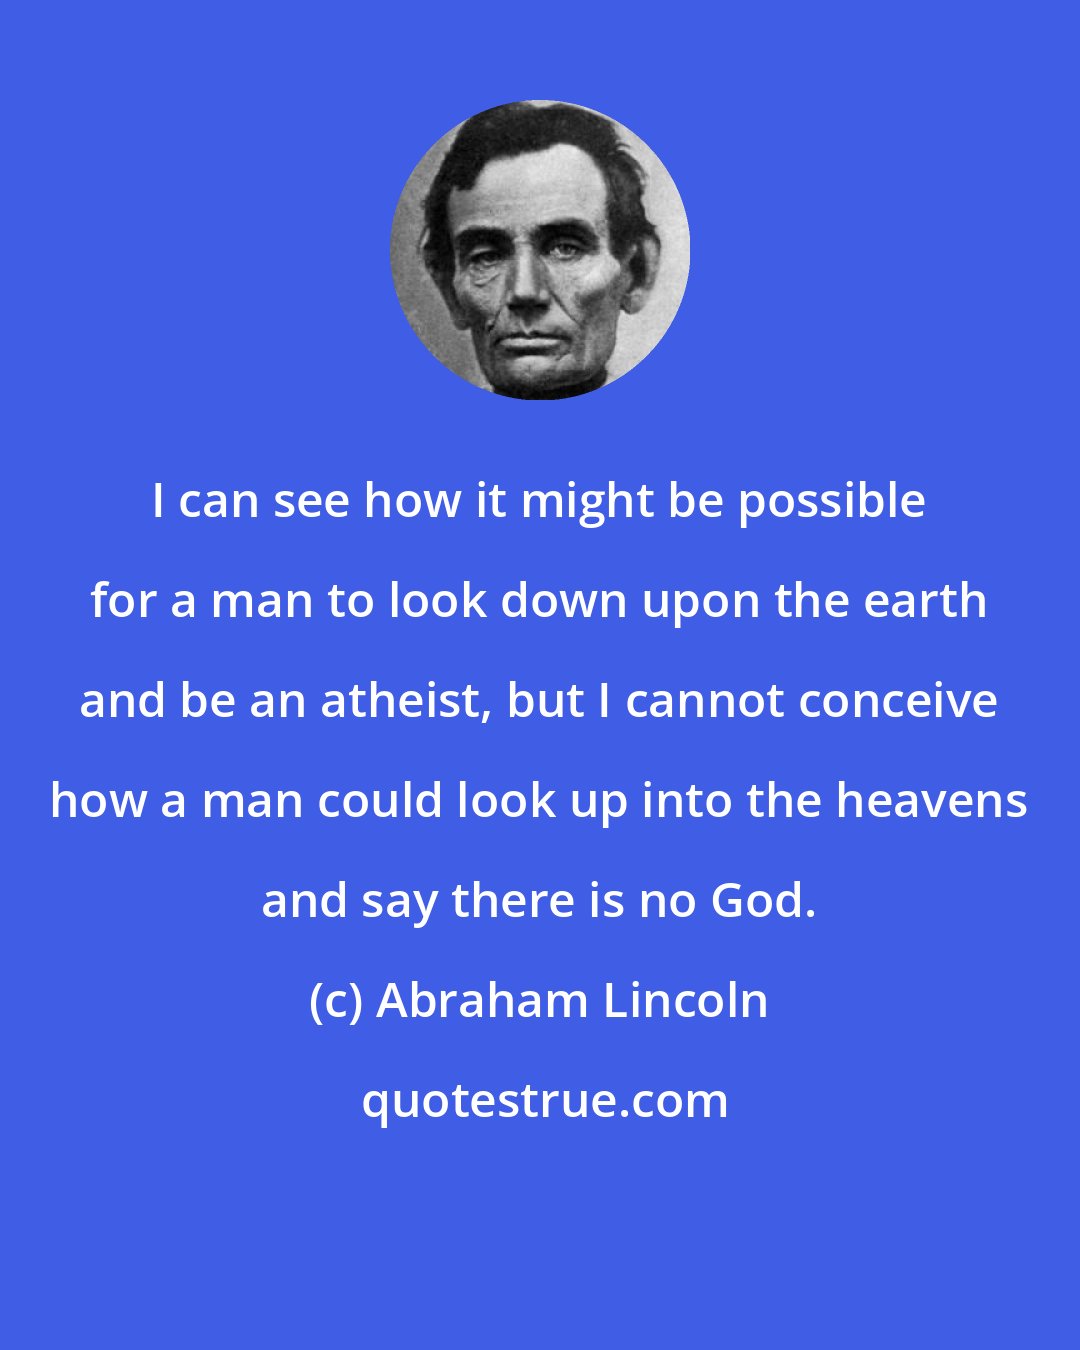 Abraham Lincoln: I can see how it might be possible for a man to look down upon the earth and be an atheist, but I cannot conceive how a man could look up into the heavens and say there is no God.